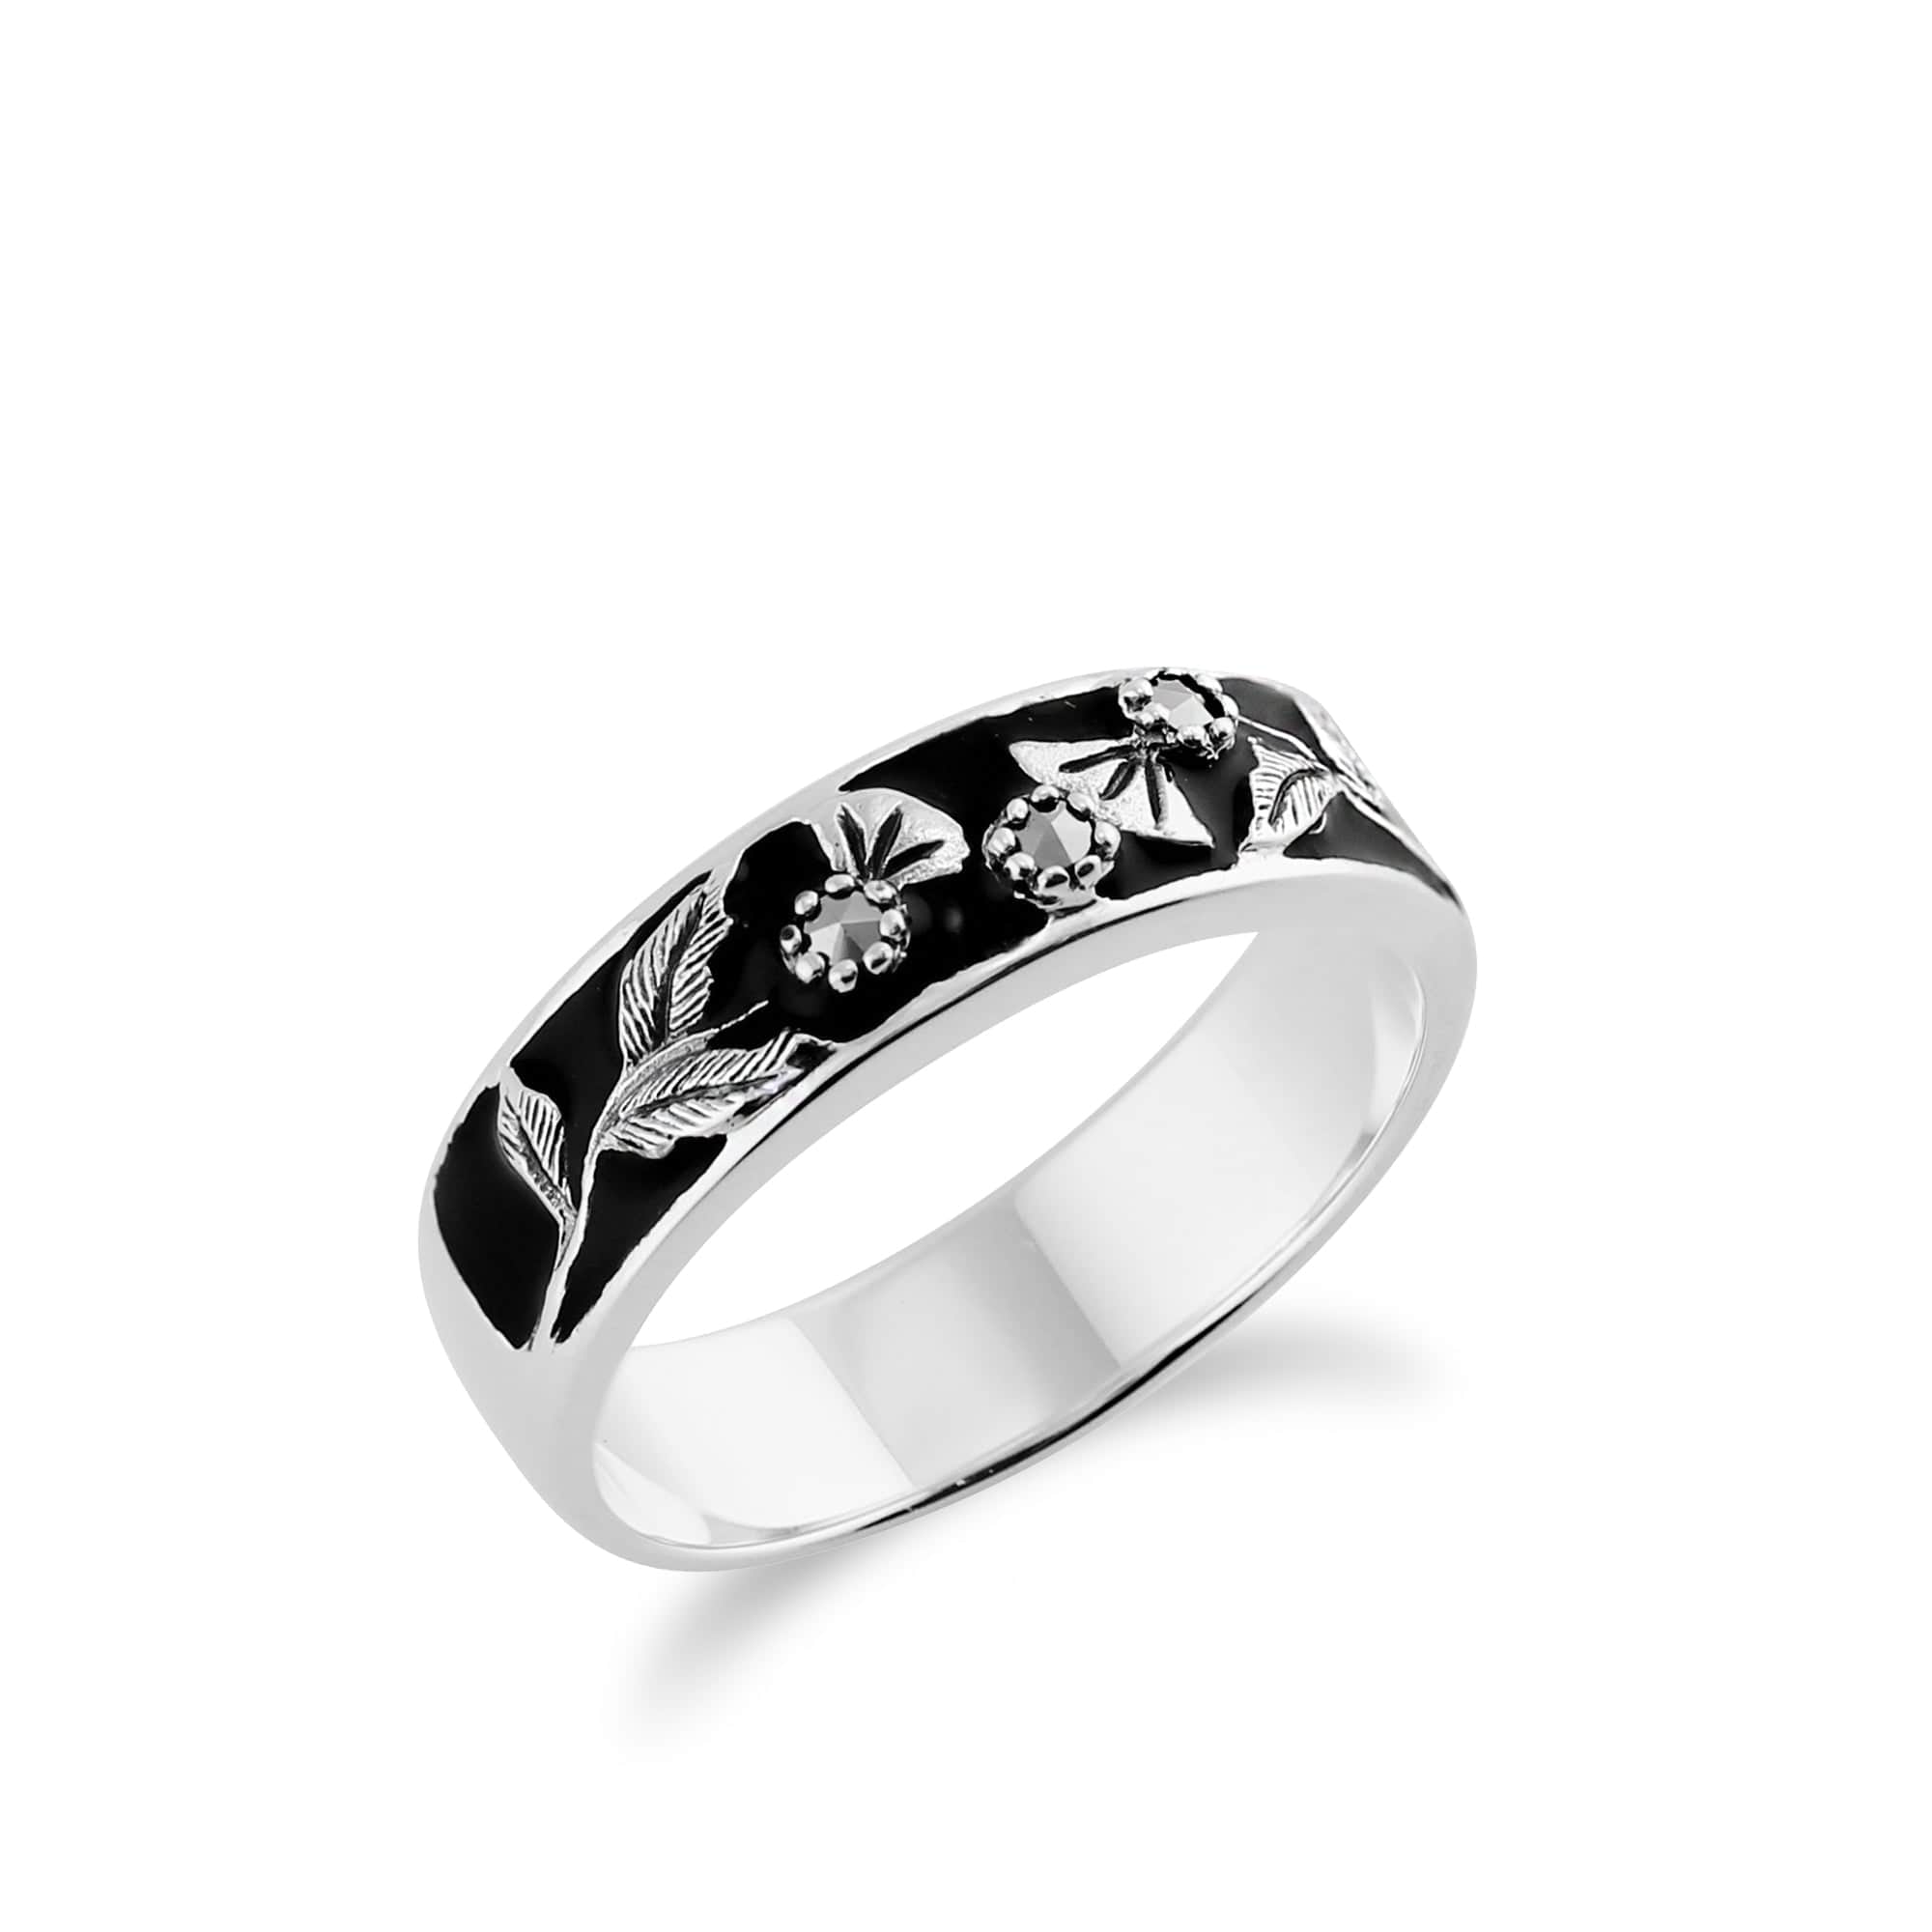 Floral Round Marcasite & Black Enamel Thisstle Band Ring in 925 Sterling Silver - Gemondo